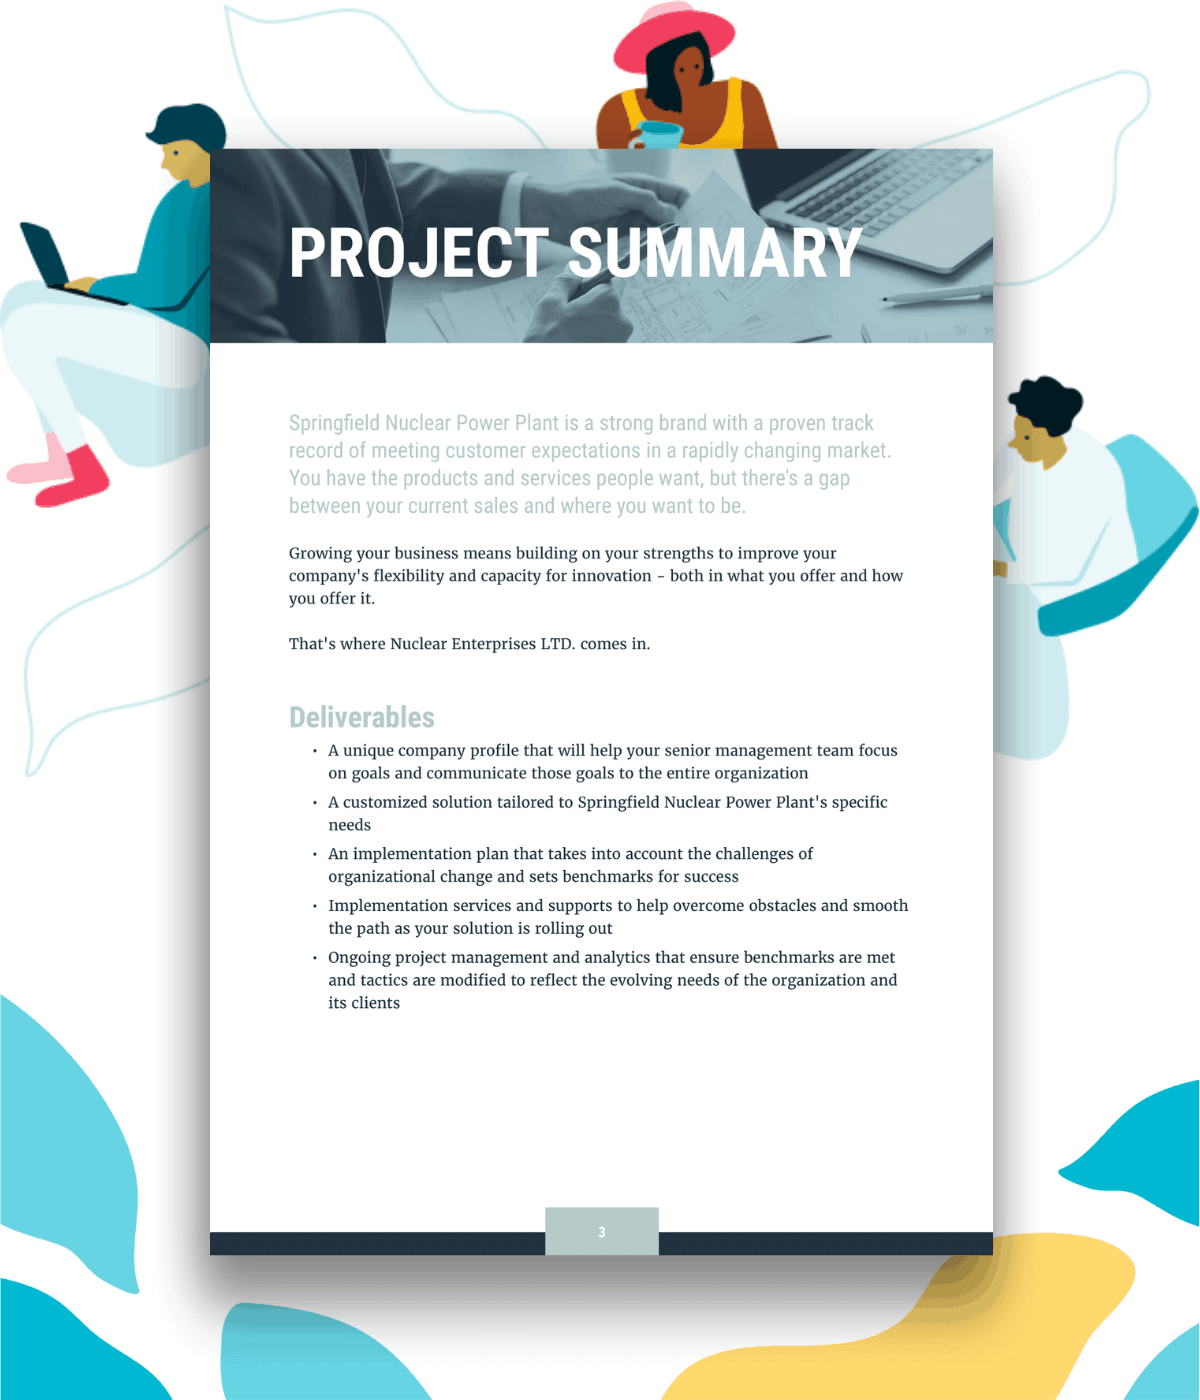 Project summary or project deliverables and timeline section of an example consulting proposal template.